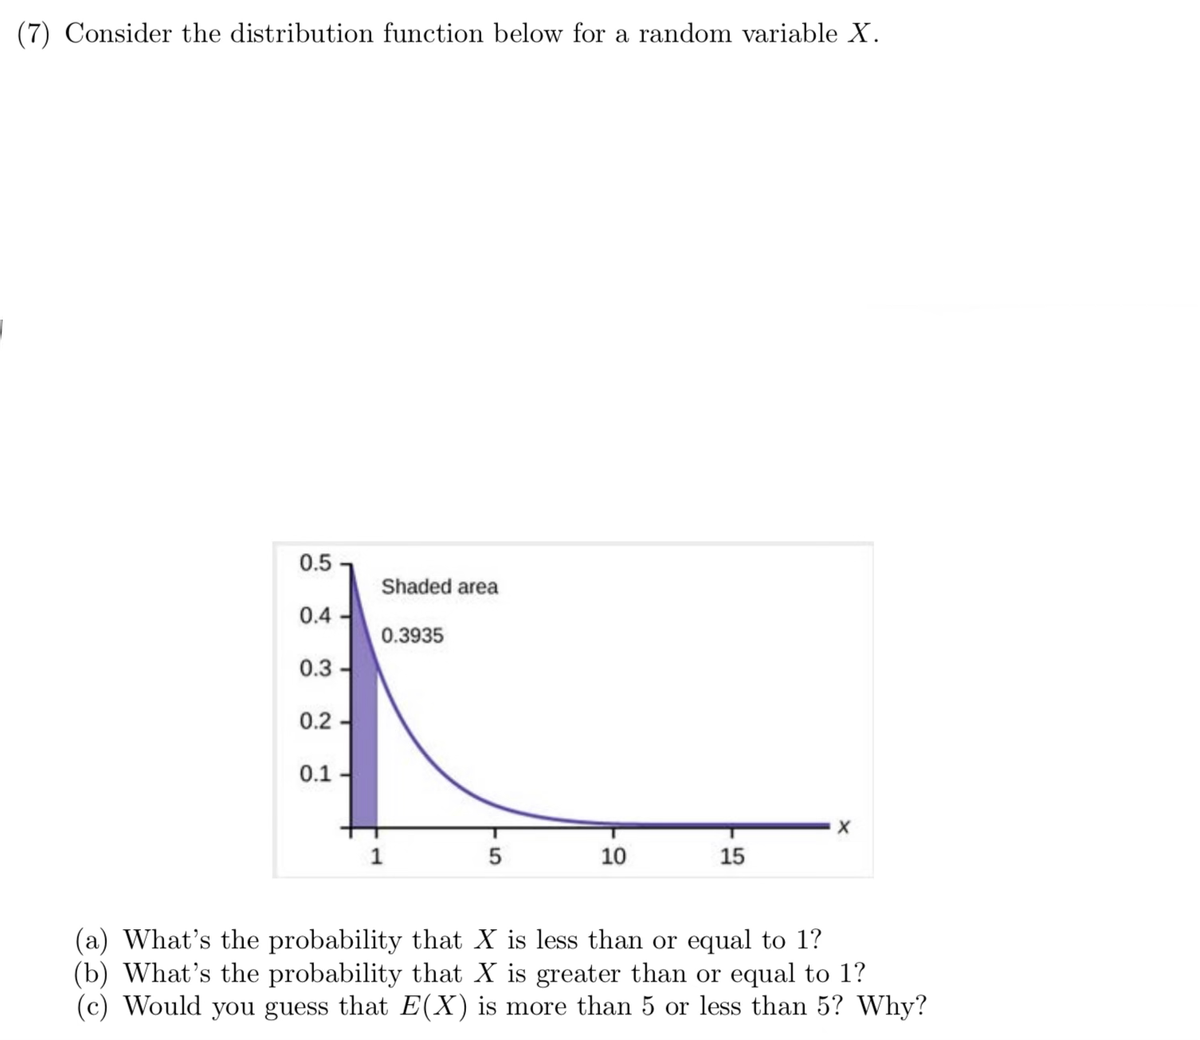 (7) Consider the distribution function below for a random variable X.
0.5
Shaded area
0.4
0.3935
0.3-
0.2
0.1
X
5
10
15
What's the probability that X is less than or equal to 1?
(b) What's the probability that X is greater than or equal to 1?
(c) Would you guess that E(X) is more than 5 or less than 5? Why?